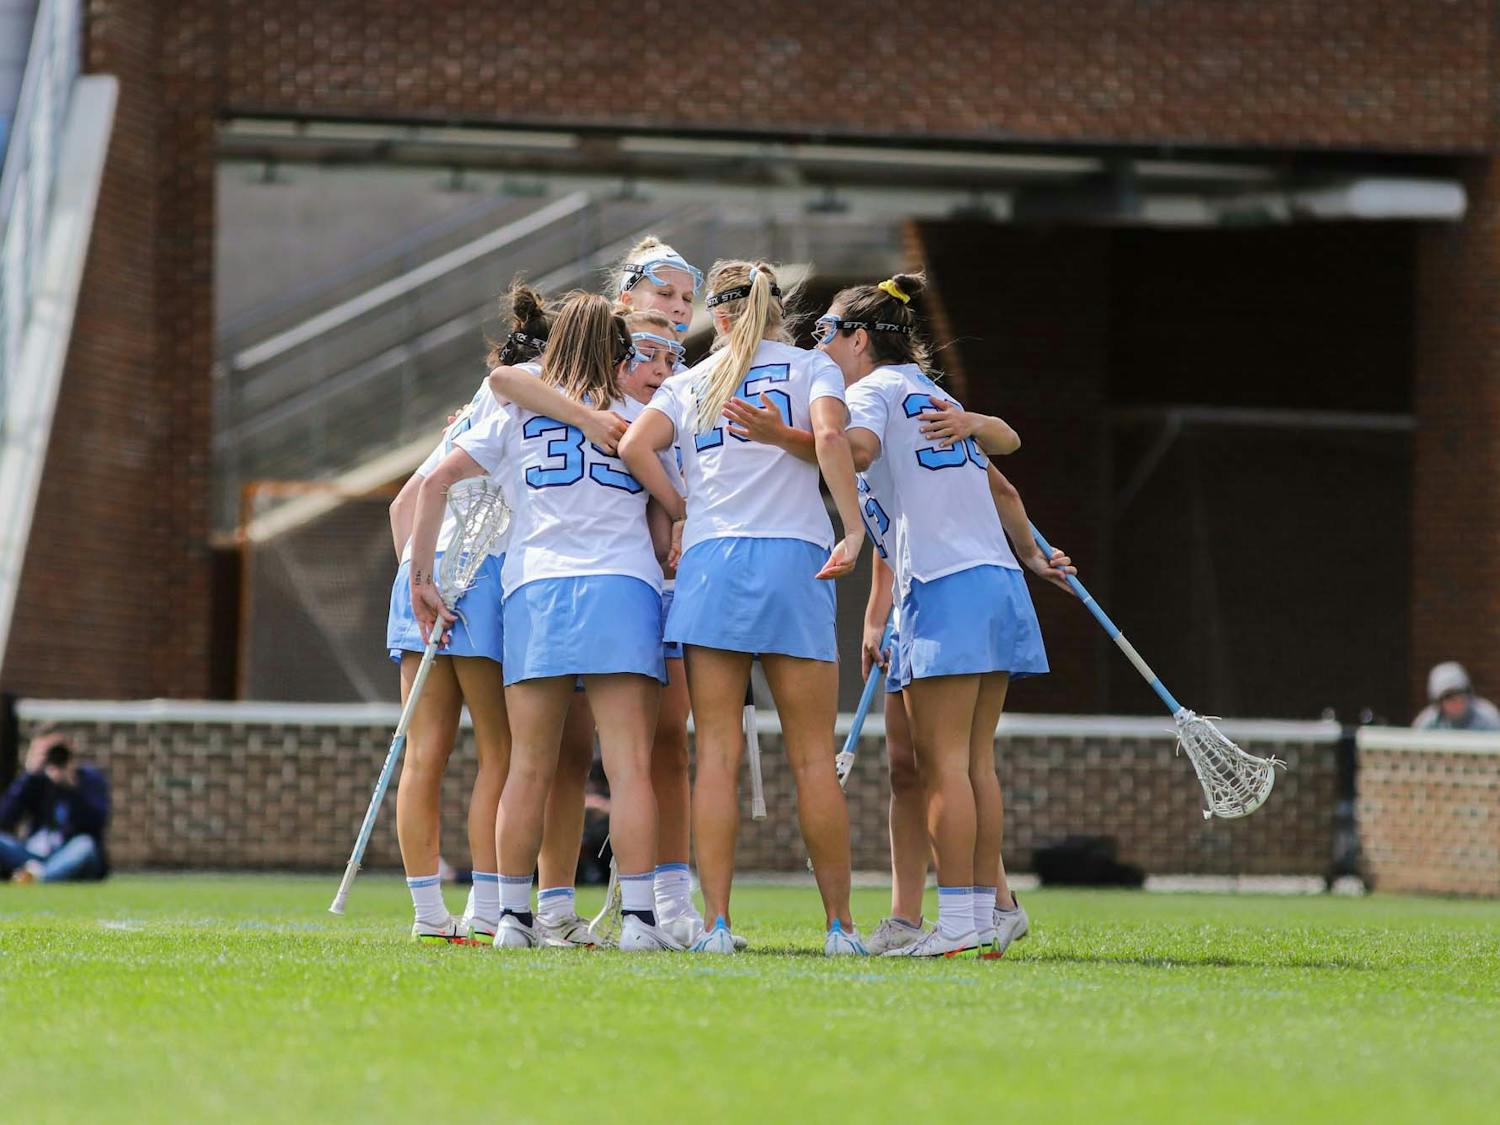 UNC players embrace after a goal against Virginia Tech on Saturday March 26, 2022 at the Dorrance Field in Chapel Hill. The Tar Heels won 20-8.